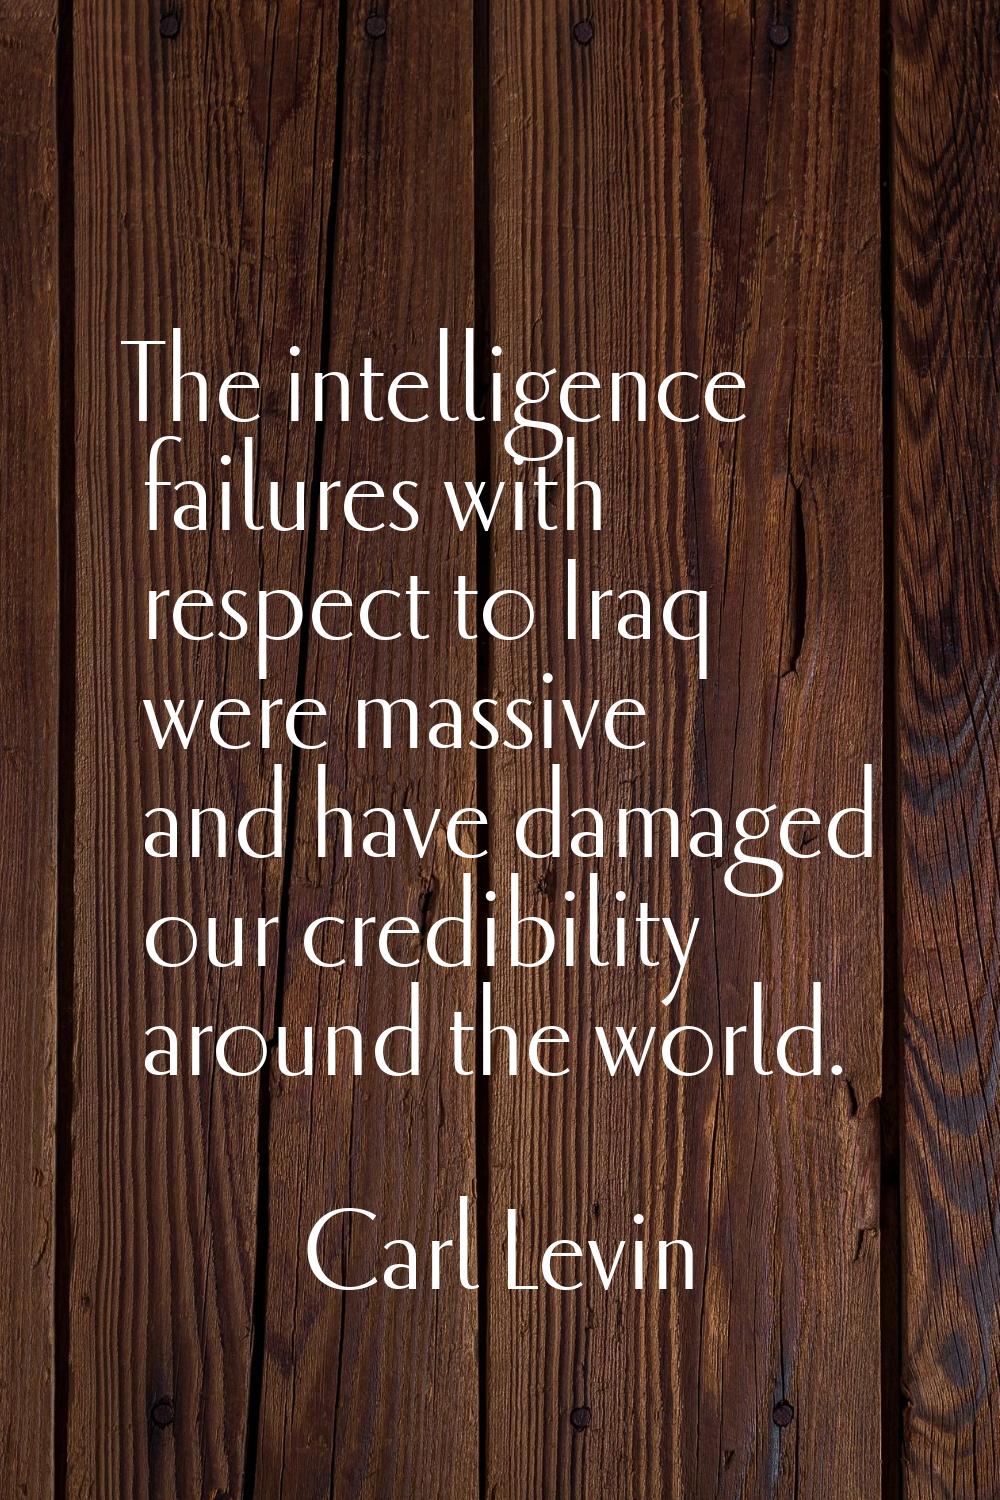 The intelligence failures with respect to Iraq were massive and have damaged our credibility around